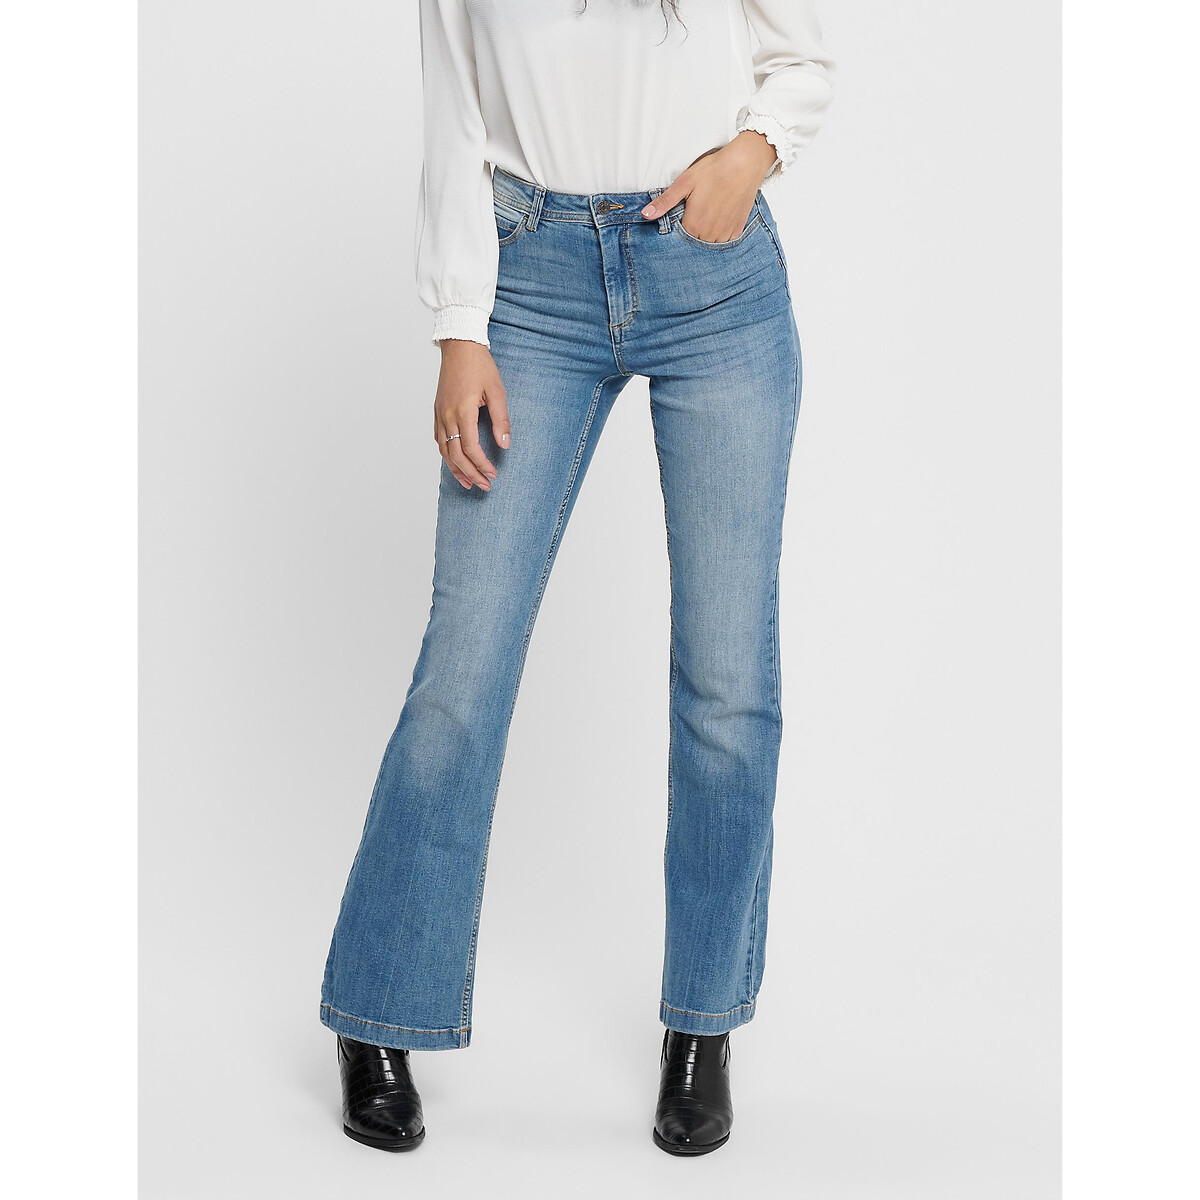 Image of Flared High Waist Jeans